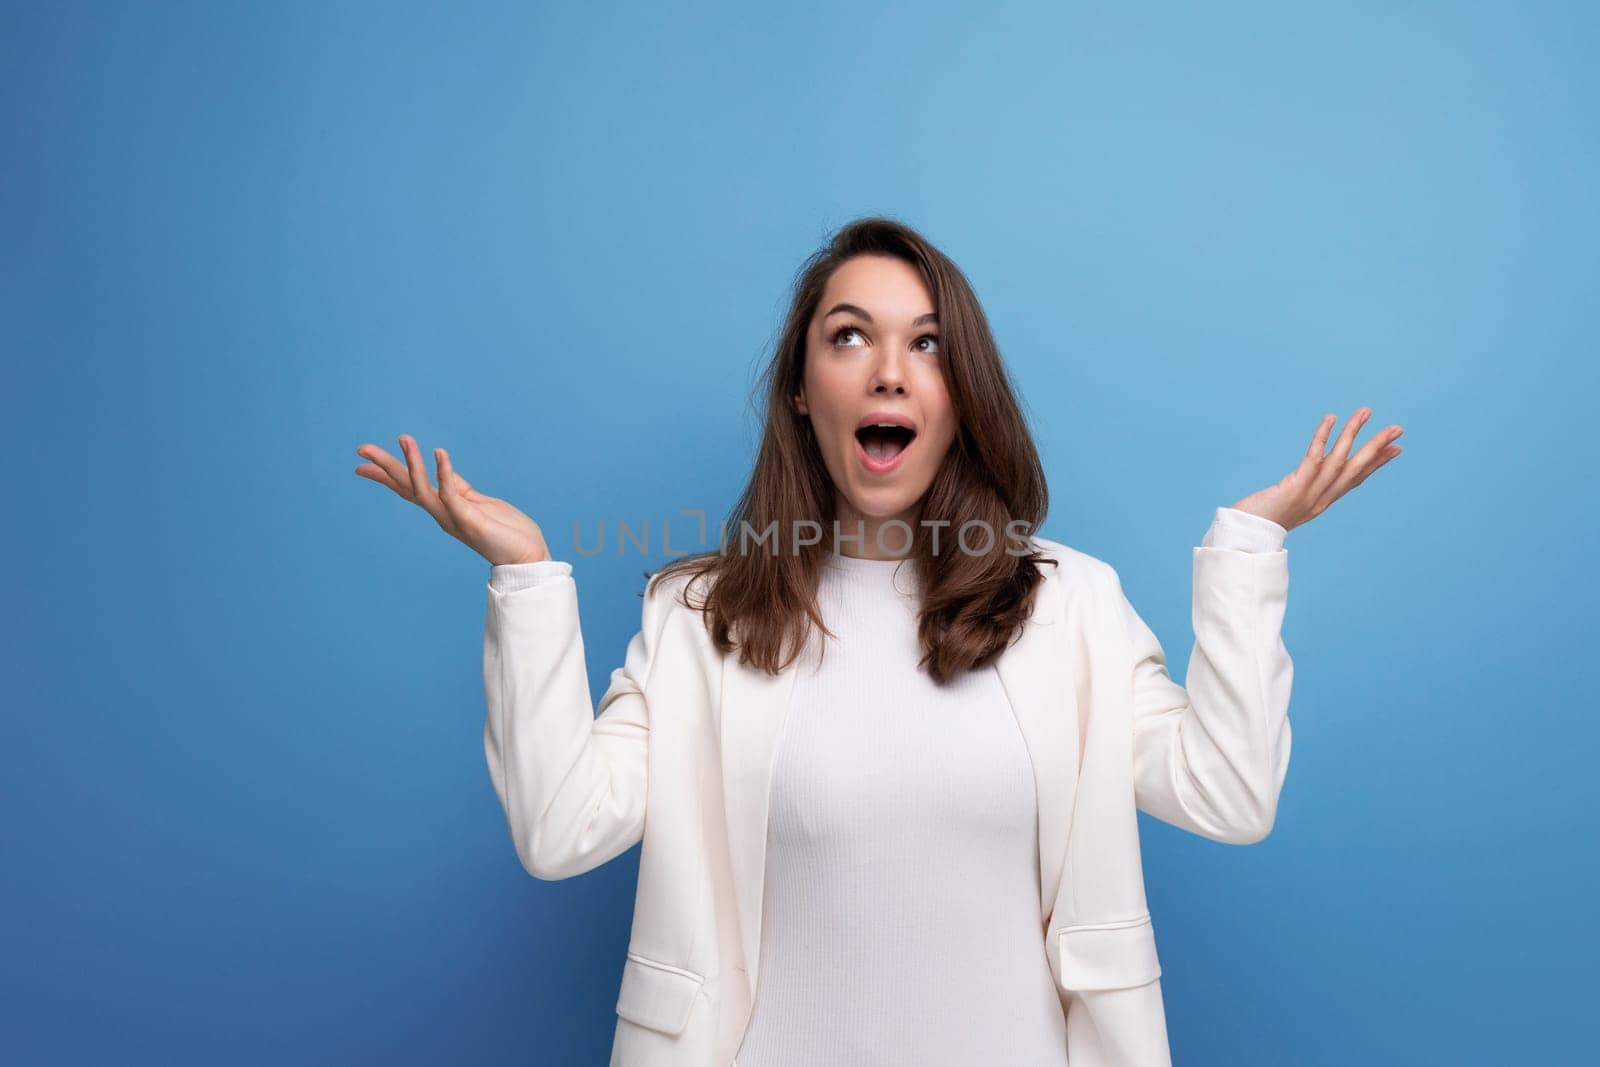 lucky happy brunette woman in dress on studio background with copyspace.